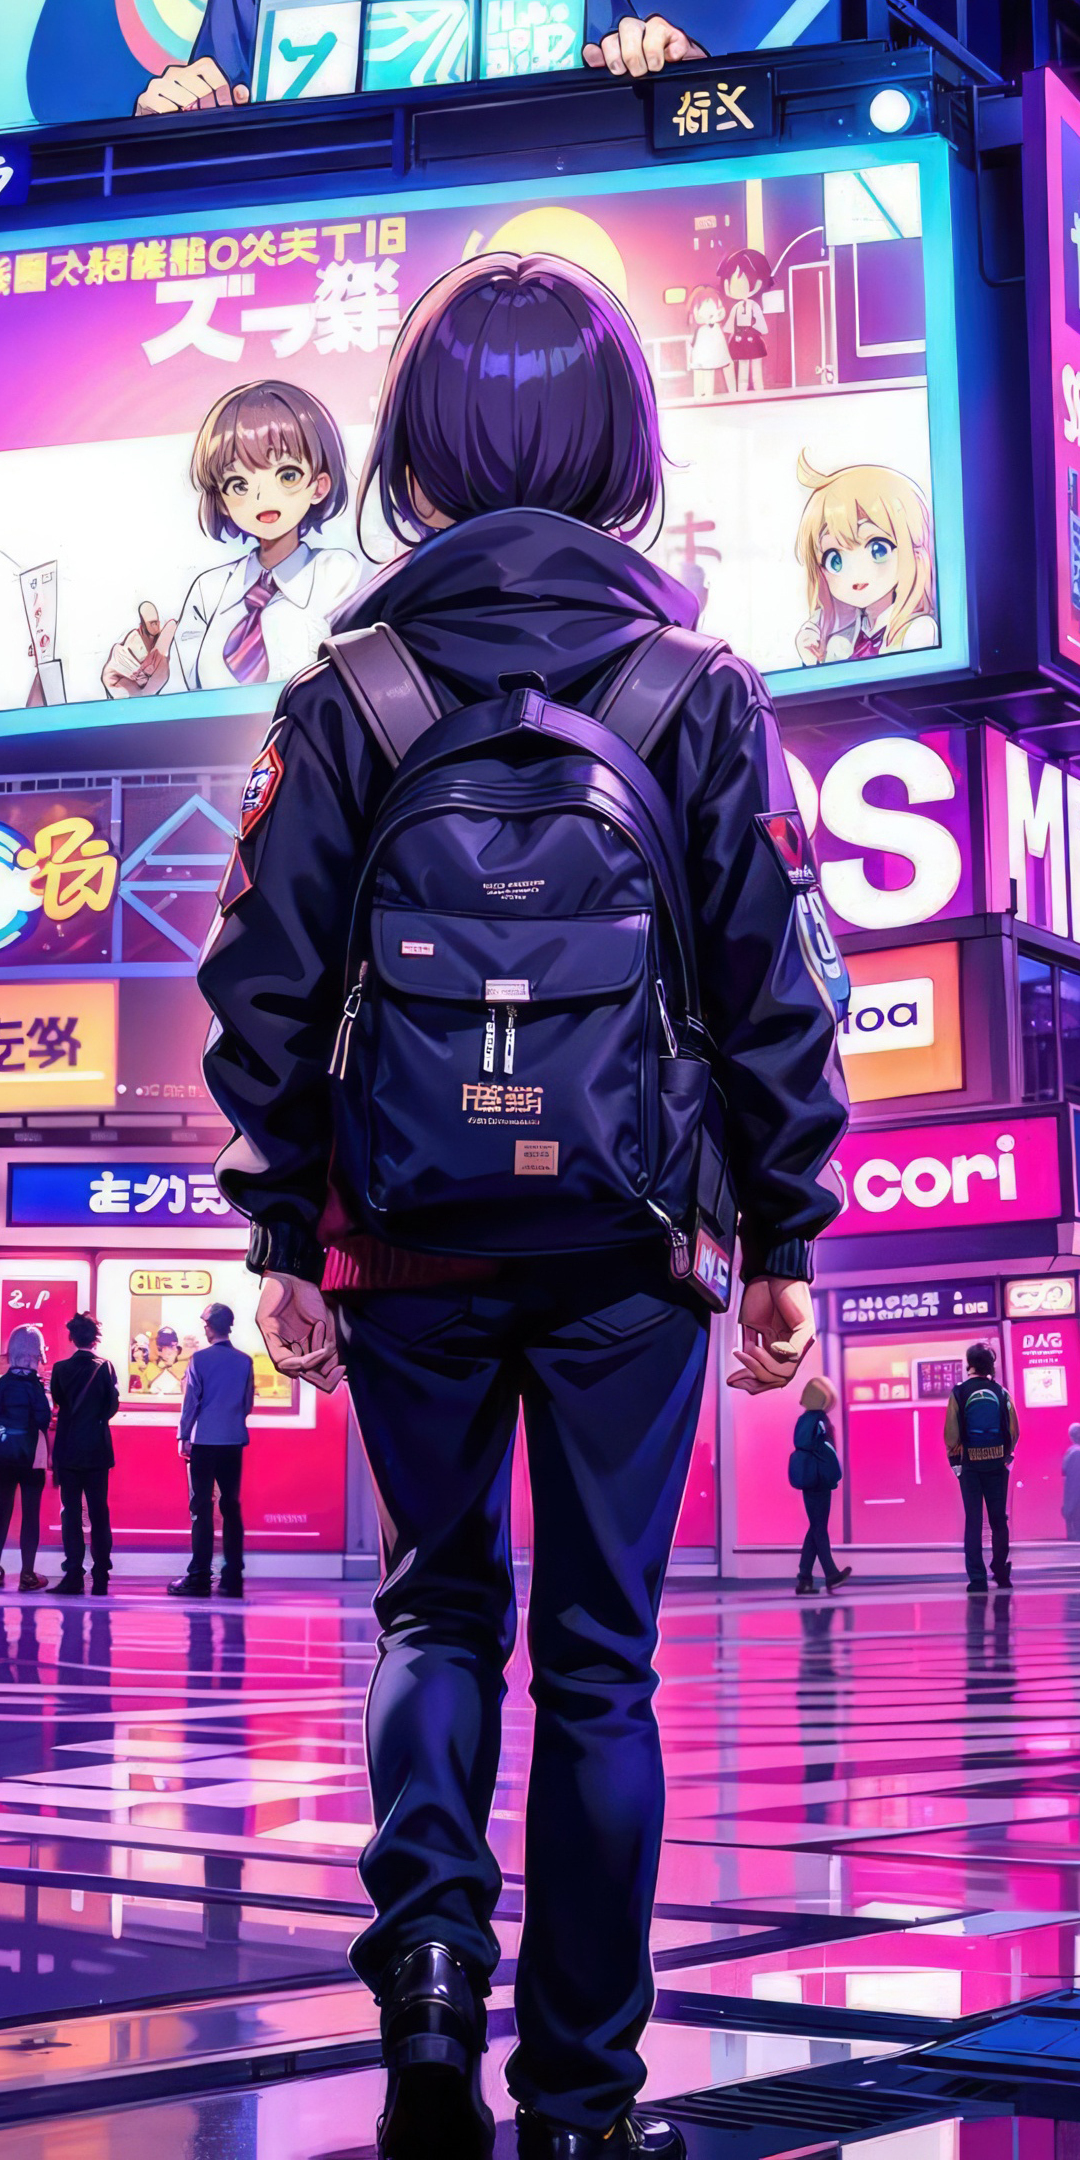 Girl in the middle of City, art, 1080x2160 wallpaper